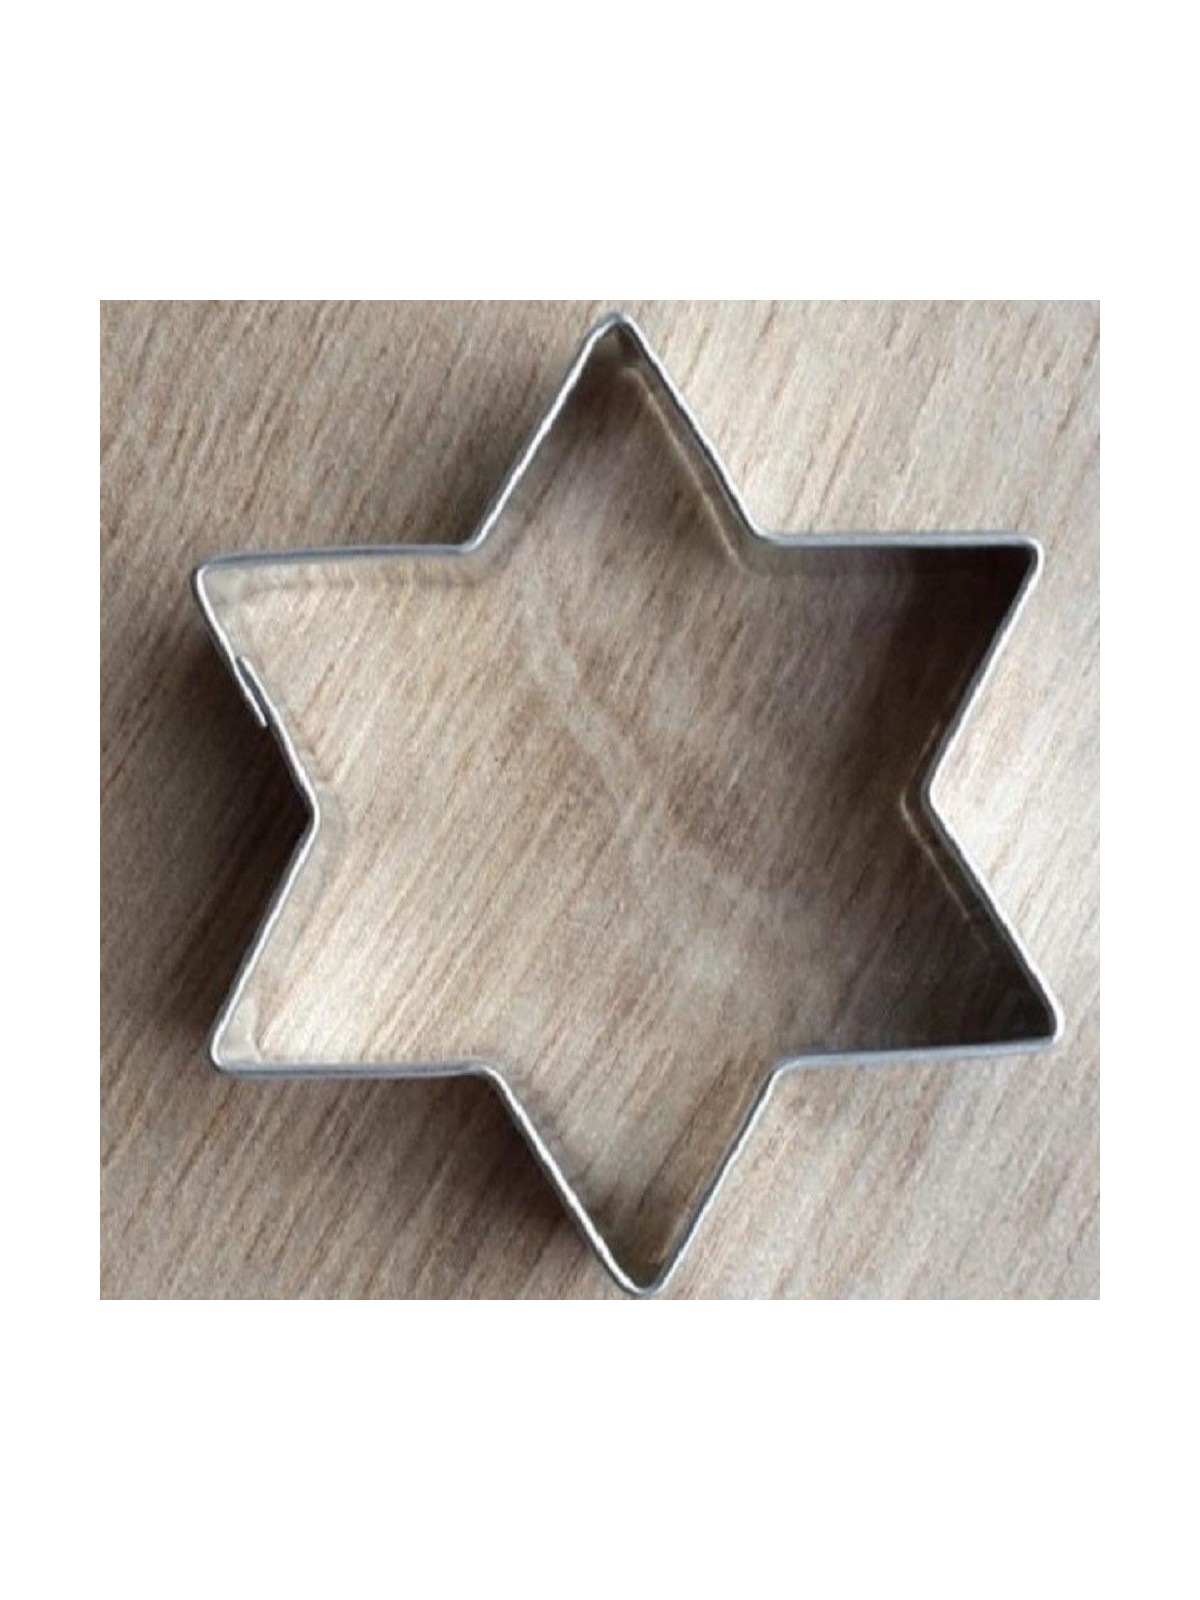 Cookie cutter - large star